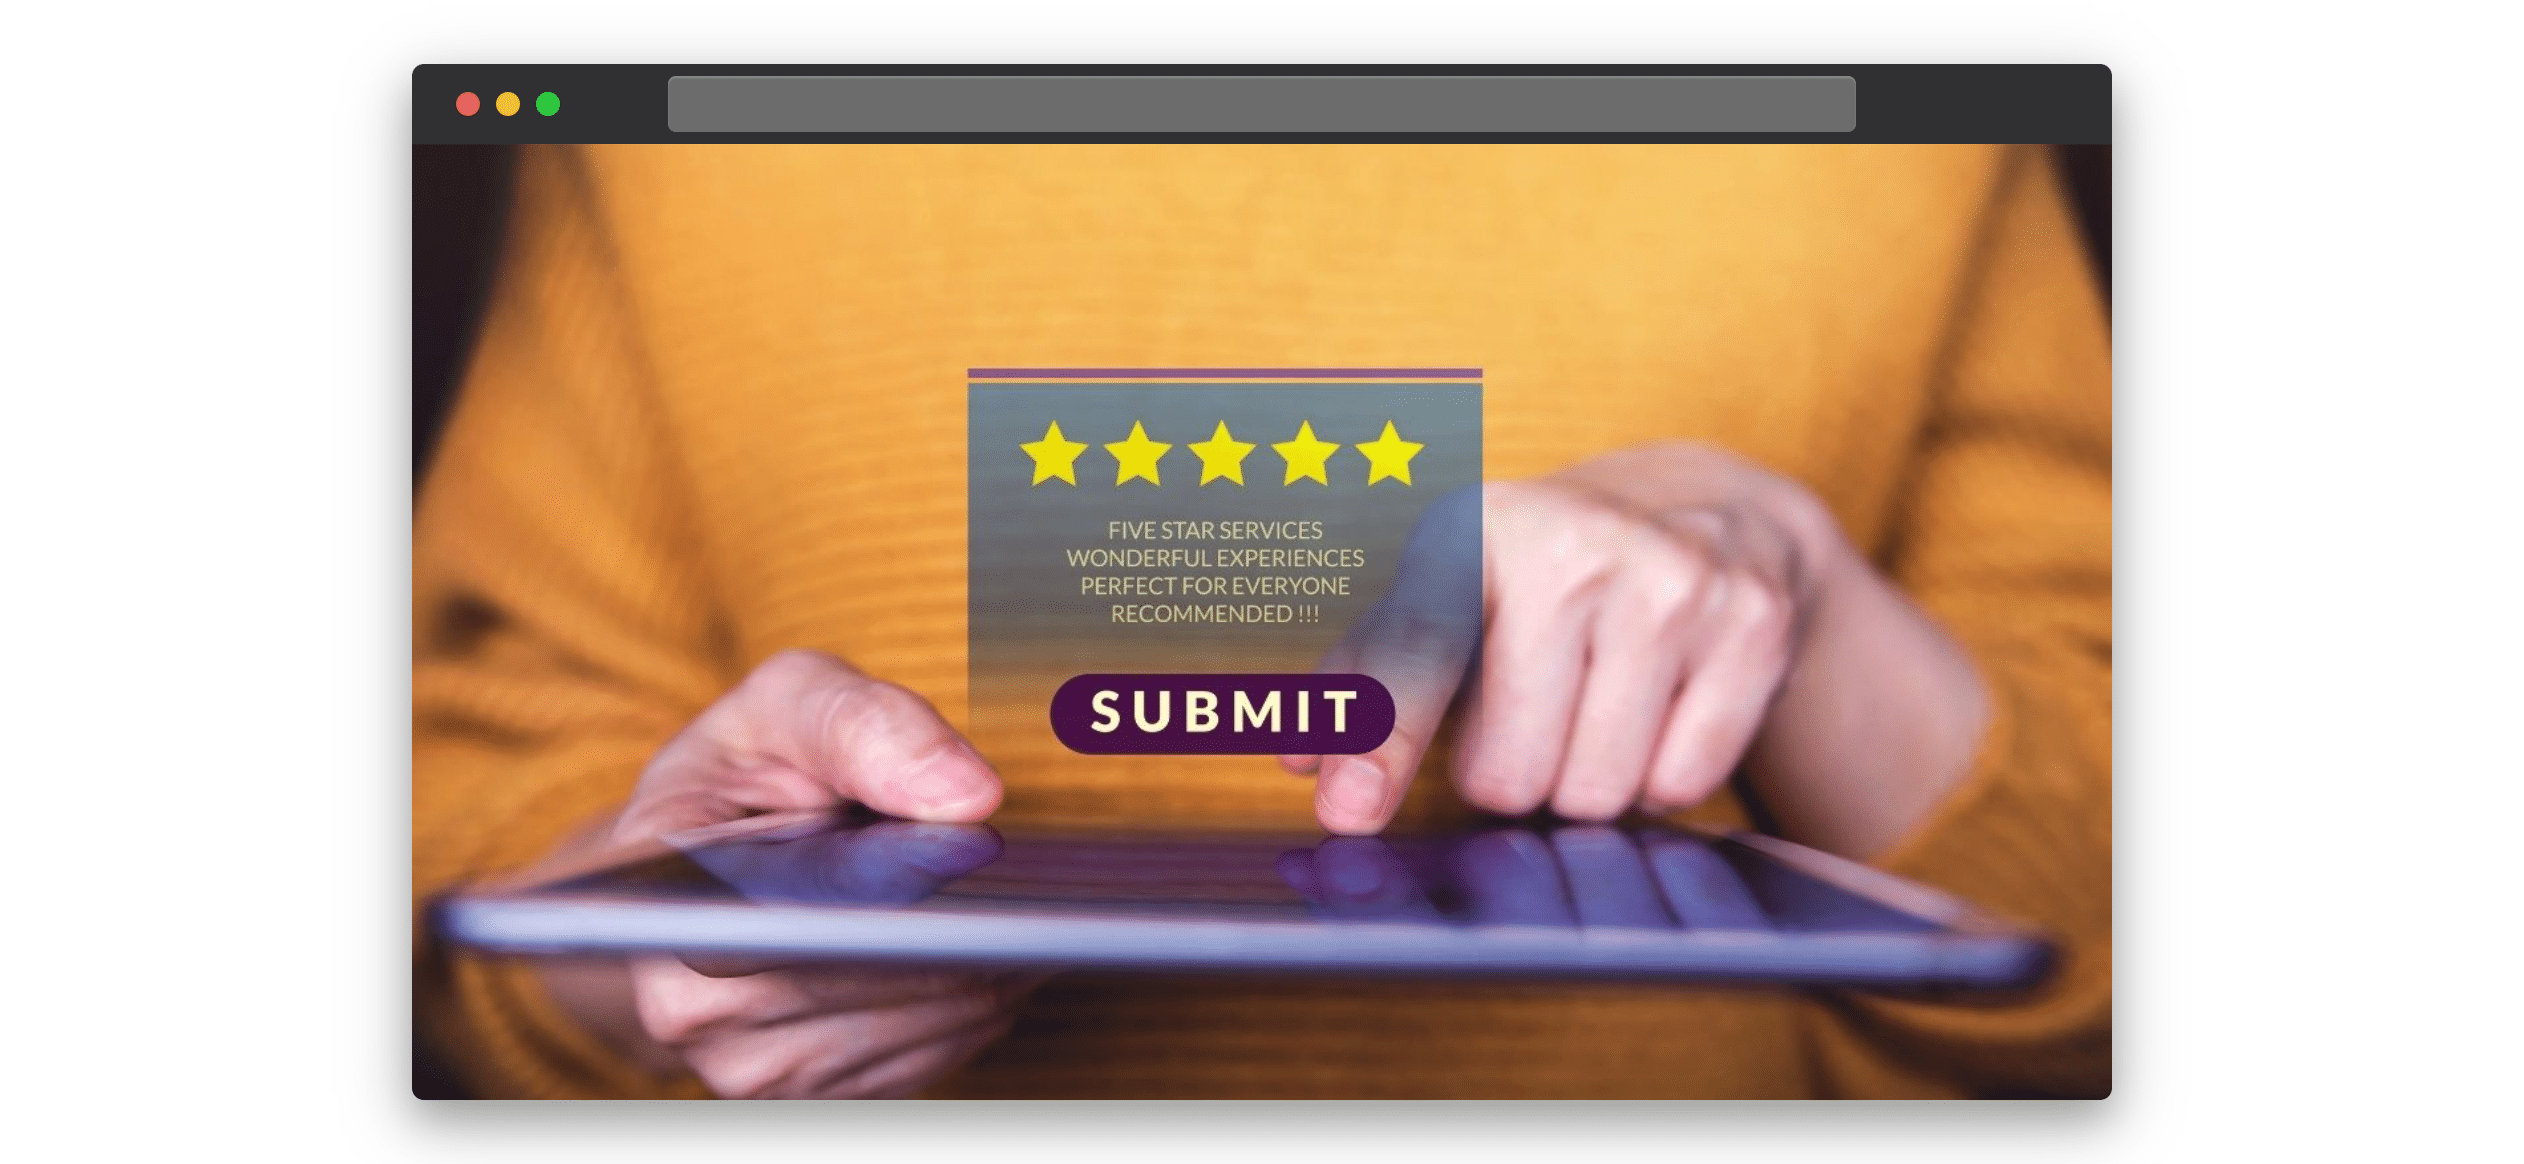 A set of hands holding a tablet, submitting a 5 star product review 